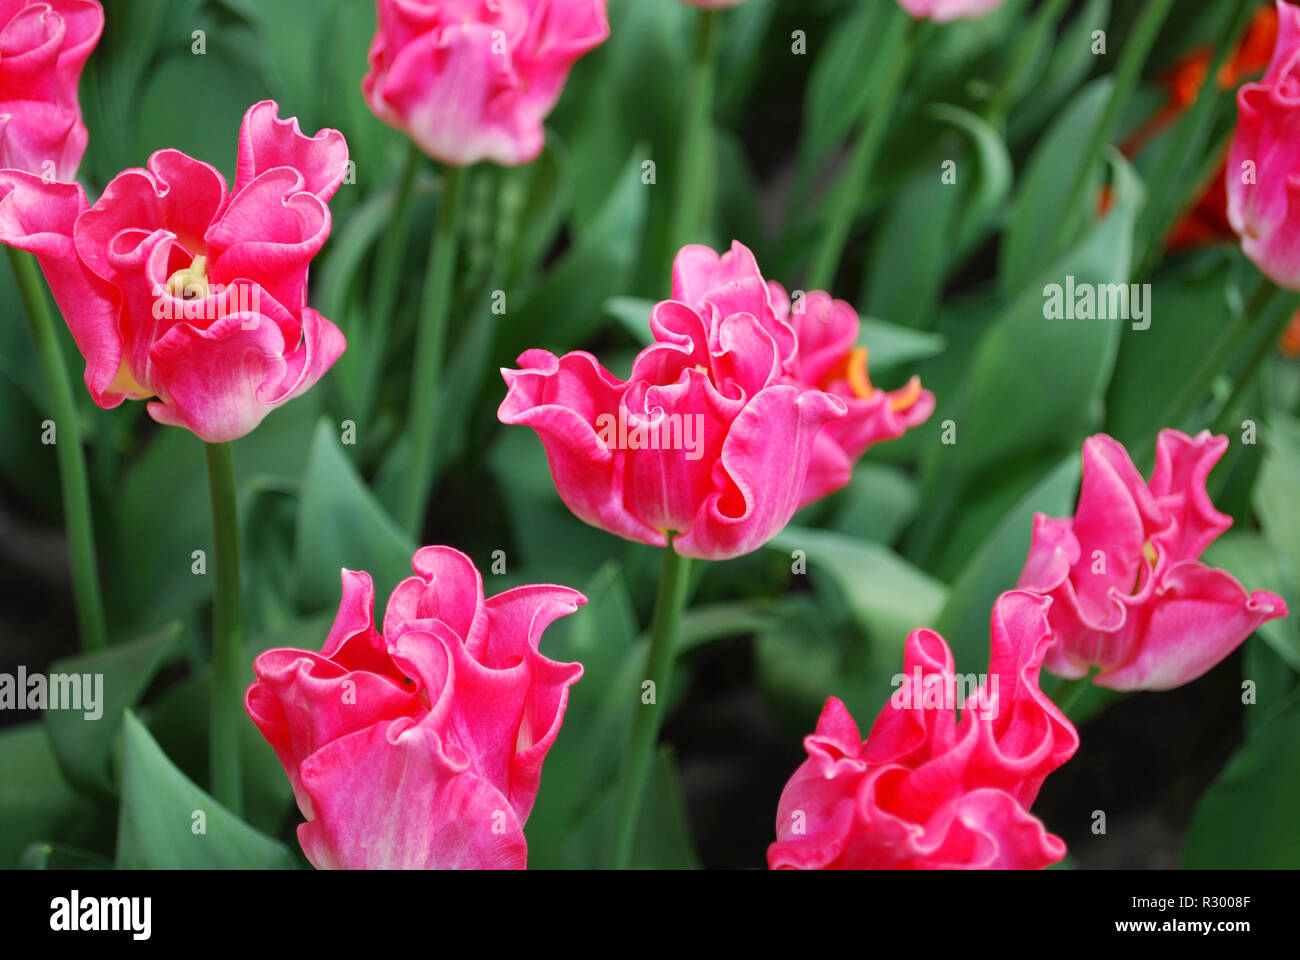 Tulip Crown of Dynasty (Triumph Group) grown in the park. Spring time in Netherlands. Stock Photo